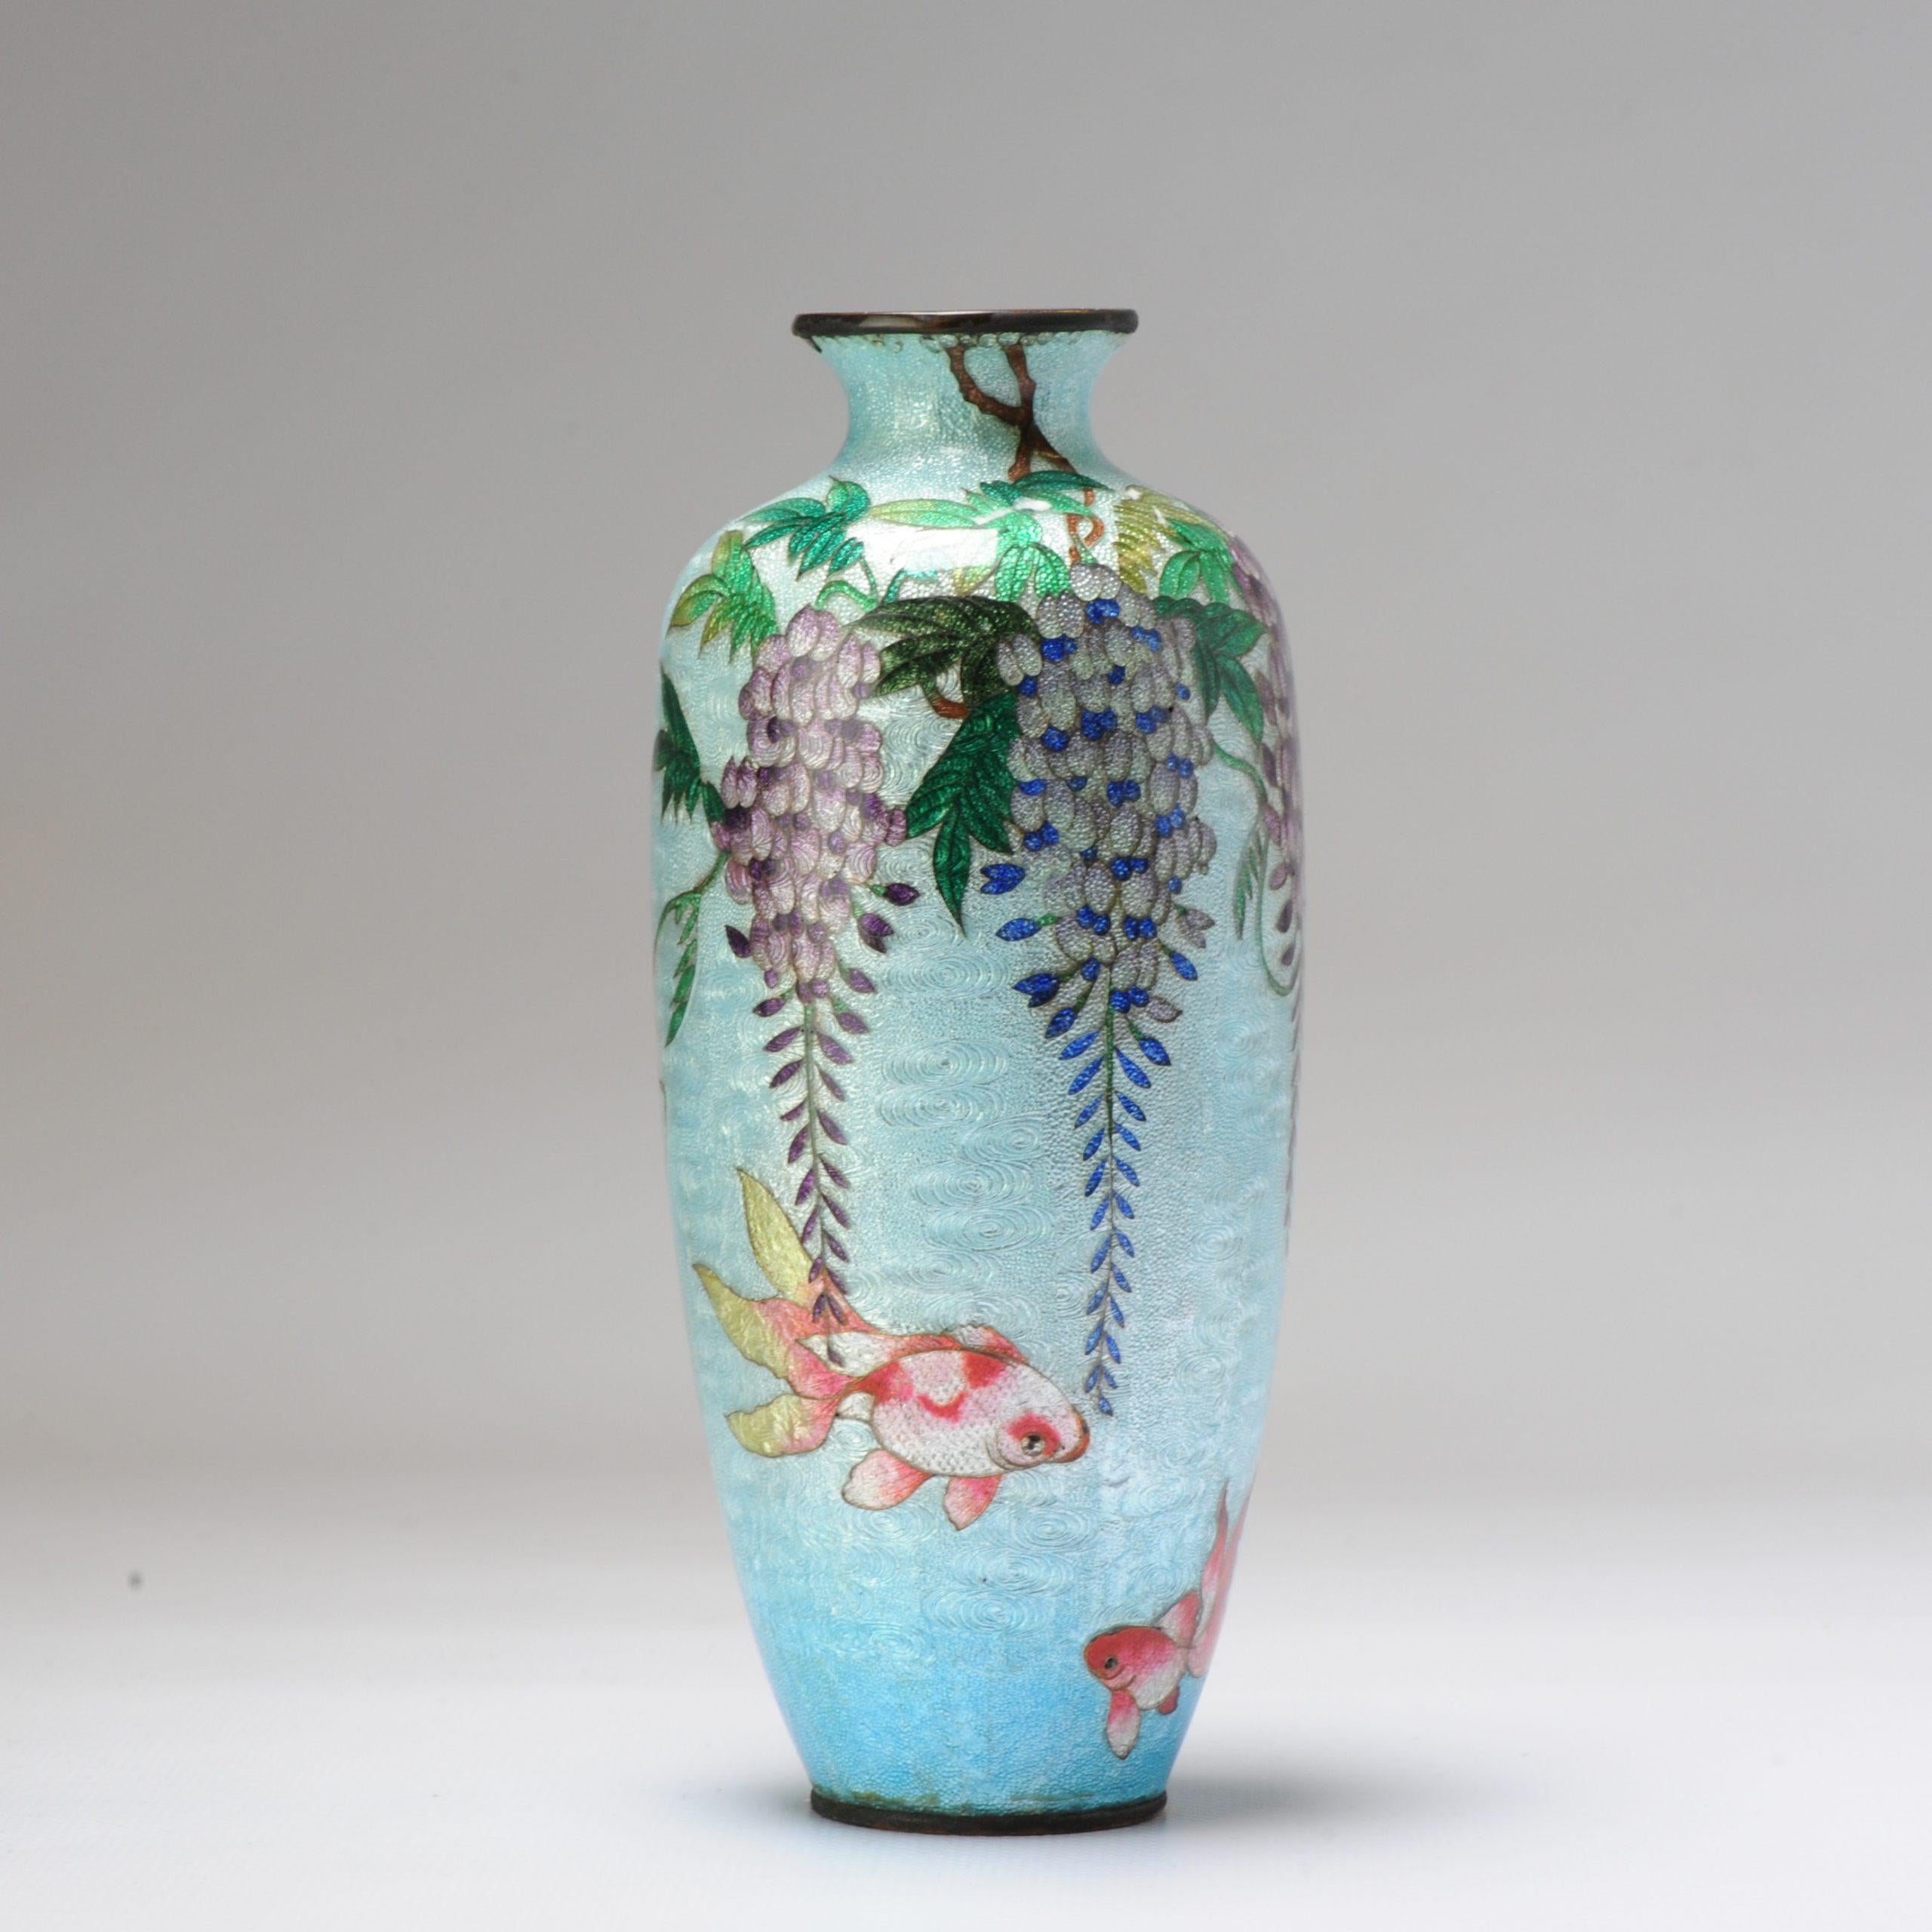 Description
Lovely and beautifully made piece of Ginbari cloisonne.

Provenance:

Originally part of the Catherina collection of Japanese bronzes and cloisonne that was partly auctioned in Amsterdam in 2006 at Sothebys. Some pieces are pictured